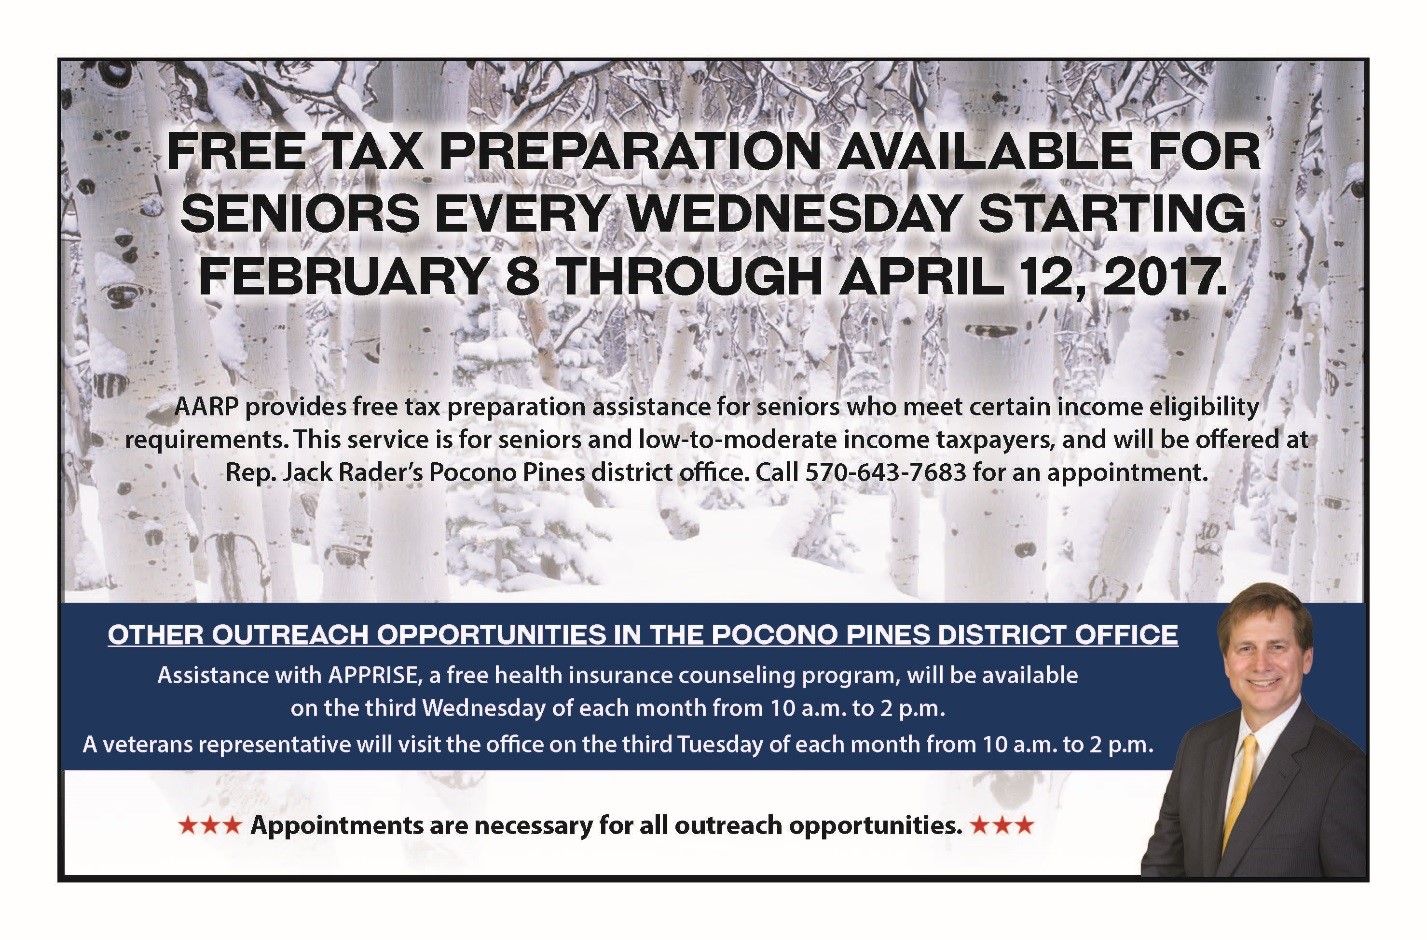 Free Tax Preparation Available for Seniors Beginning Feb. 8 | PA State Rep. Jack Rader